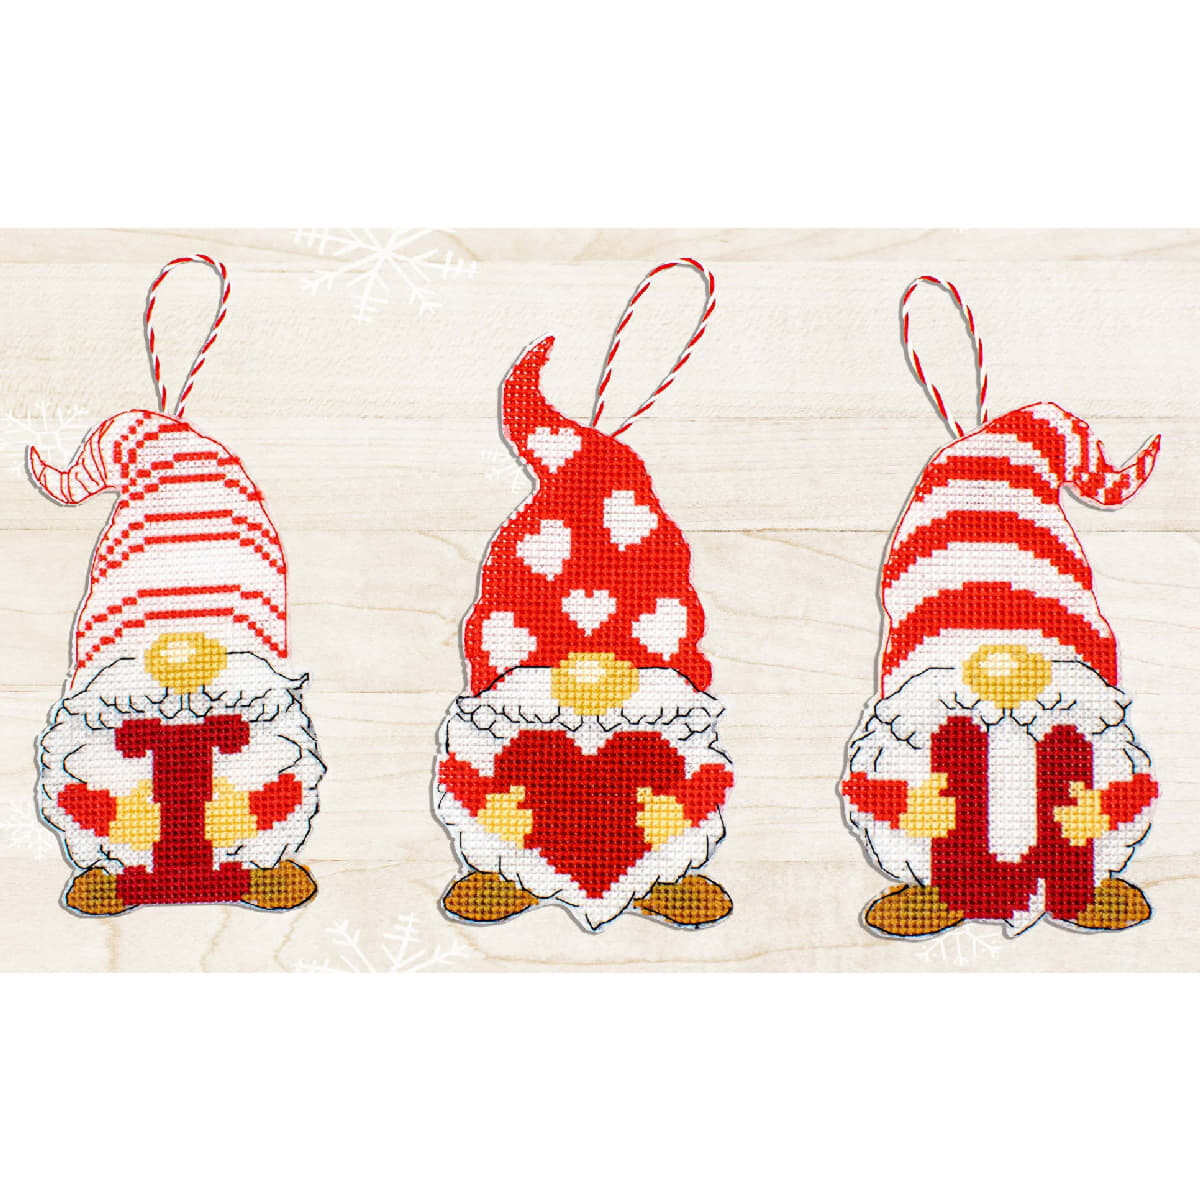 The cross stitch ornaments from this embroidery pack from...